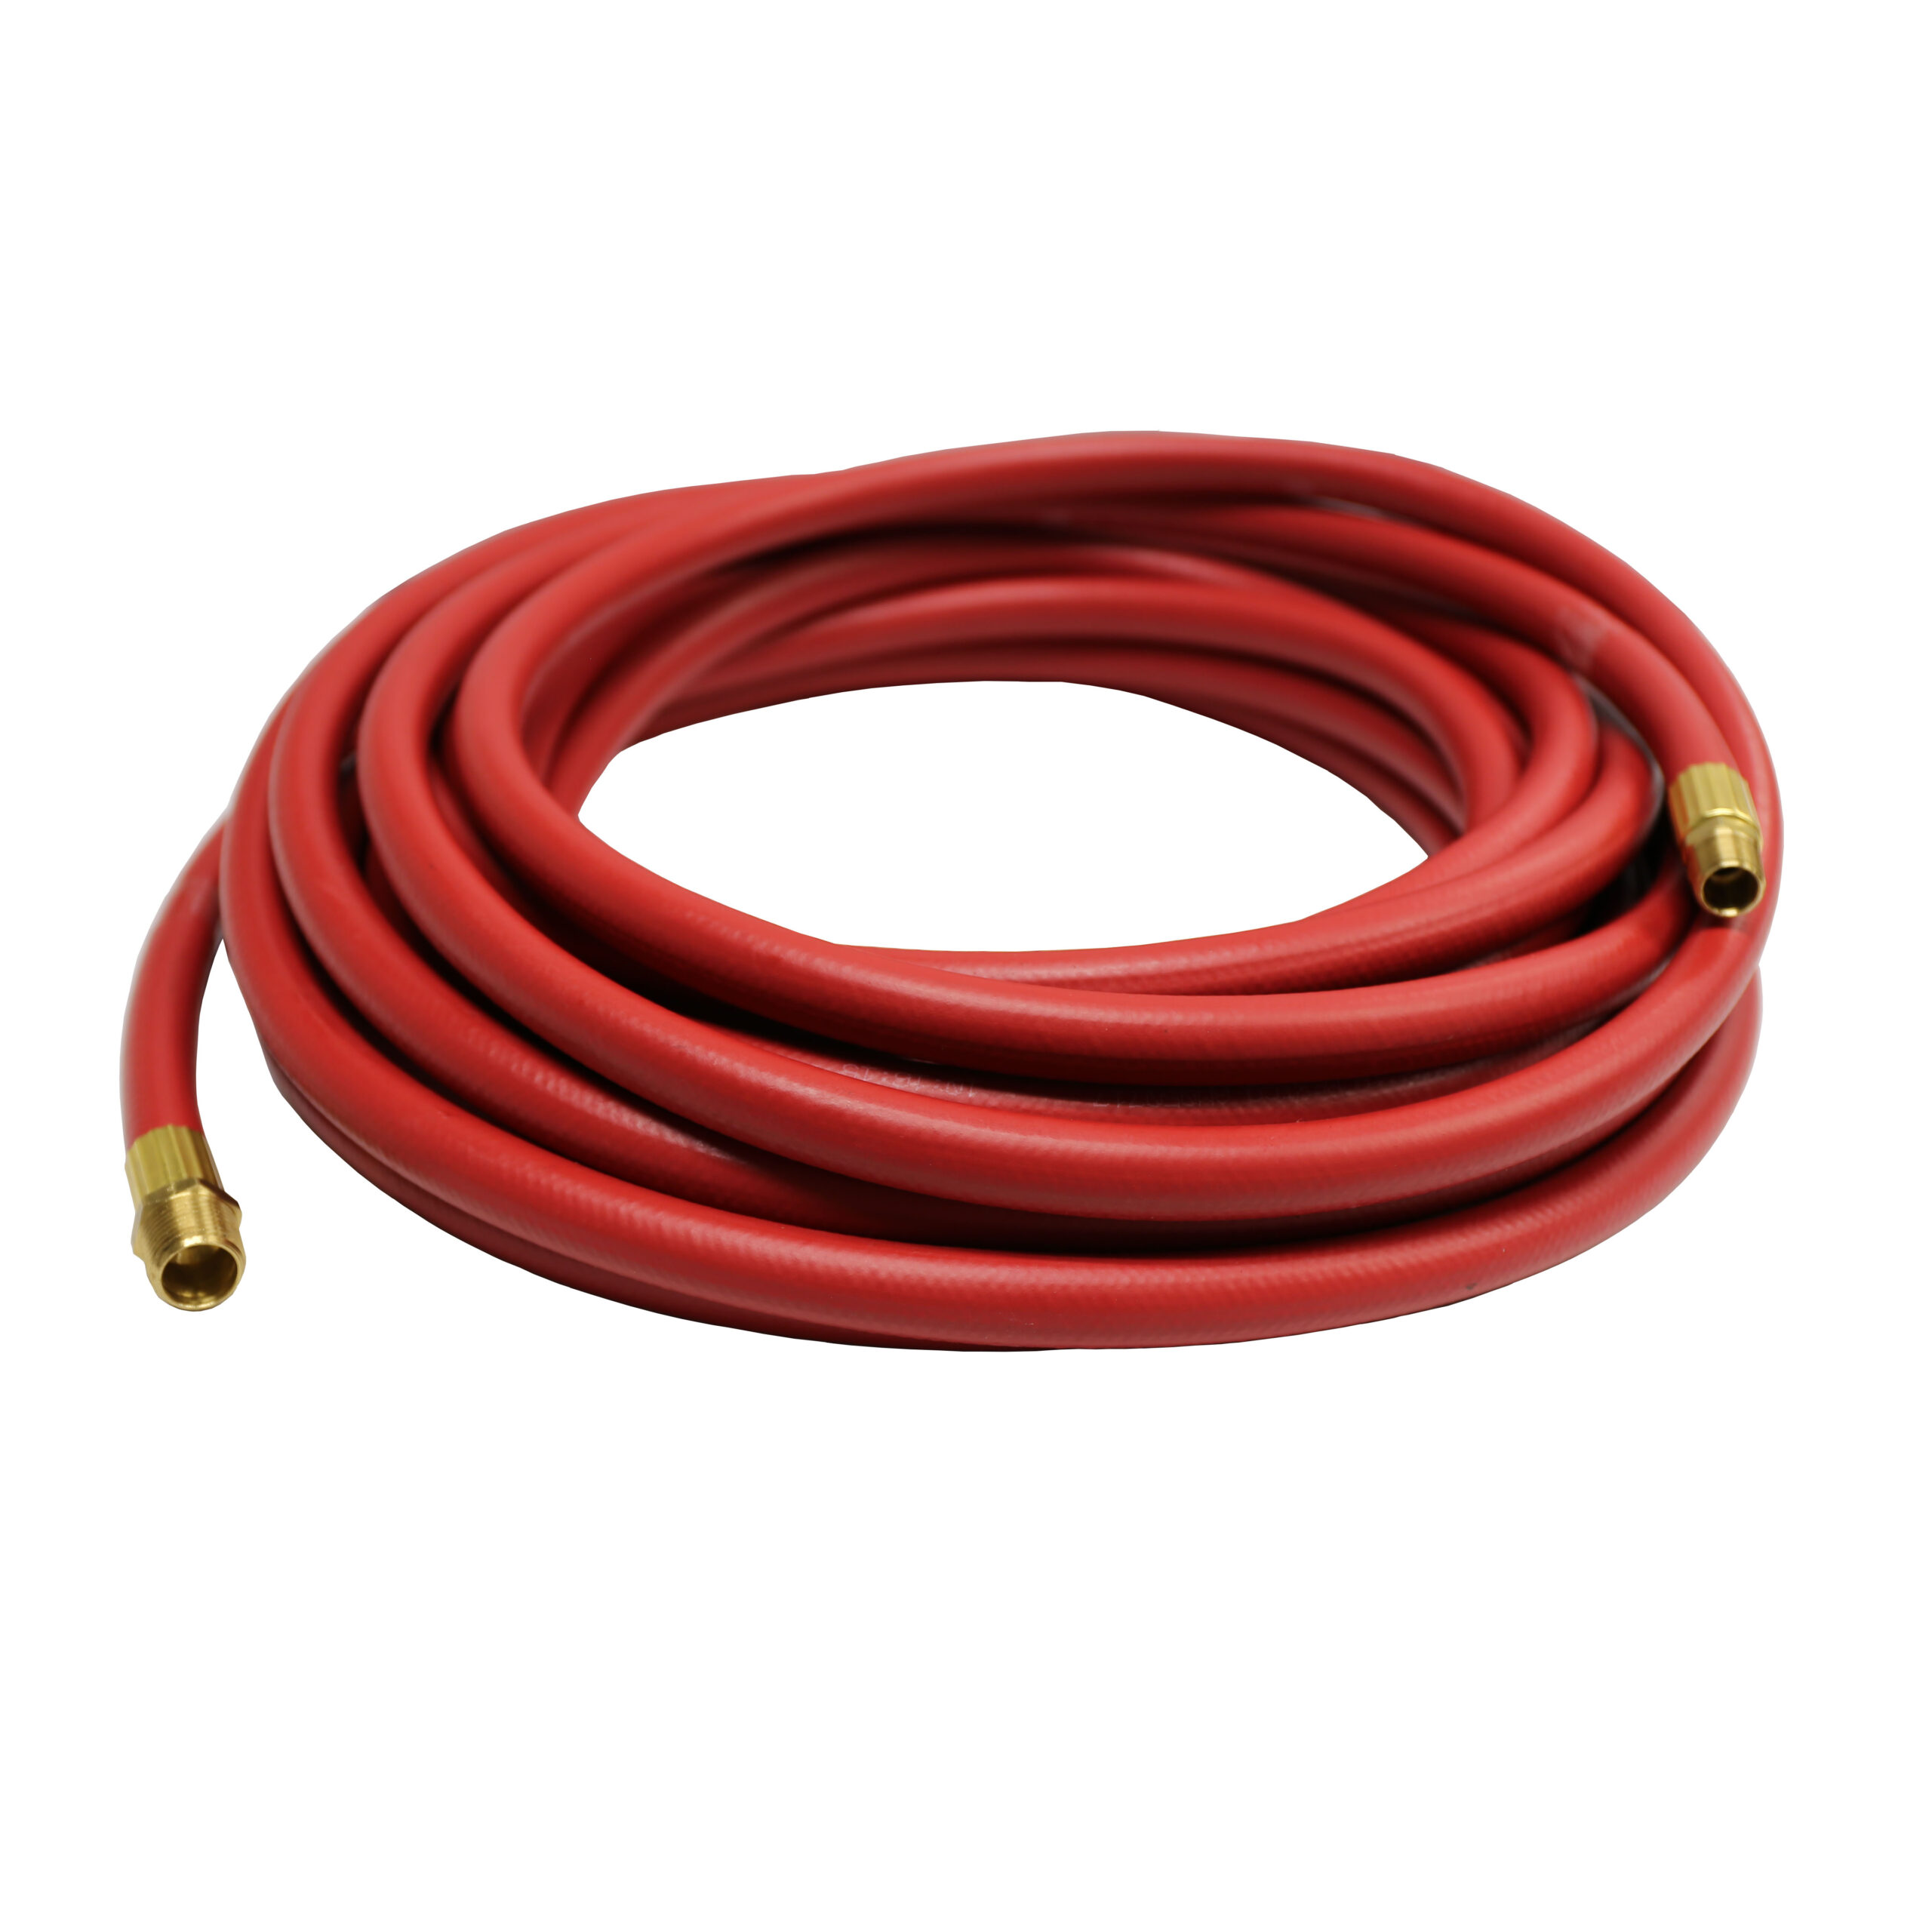 Reelcraft 601143-25 - 3/8 in. x 25 ft. Low Pressure Rubber Air Hose